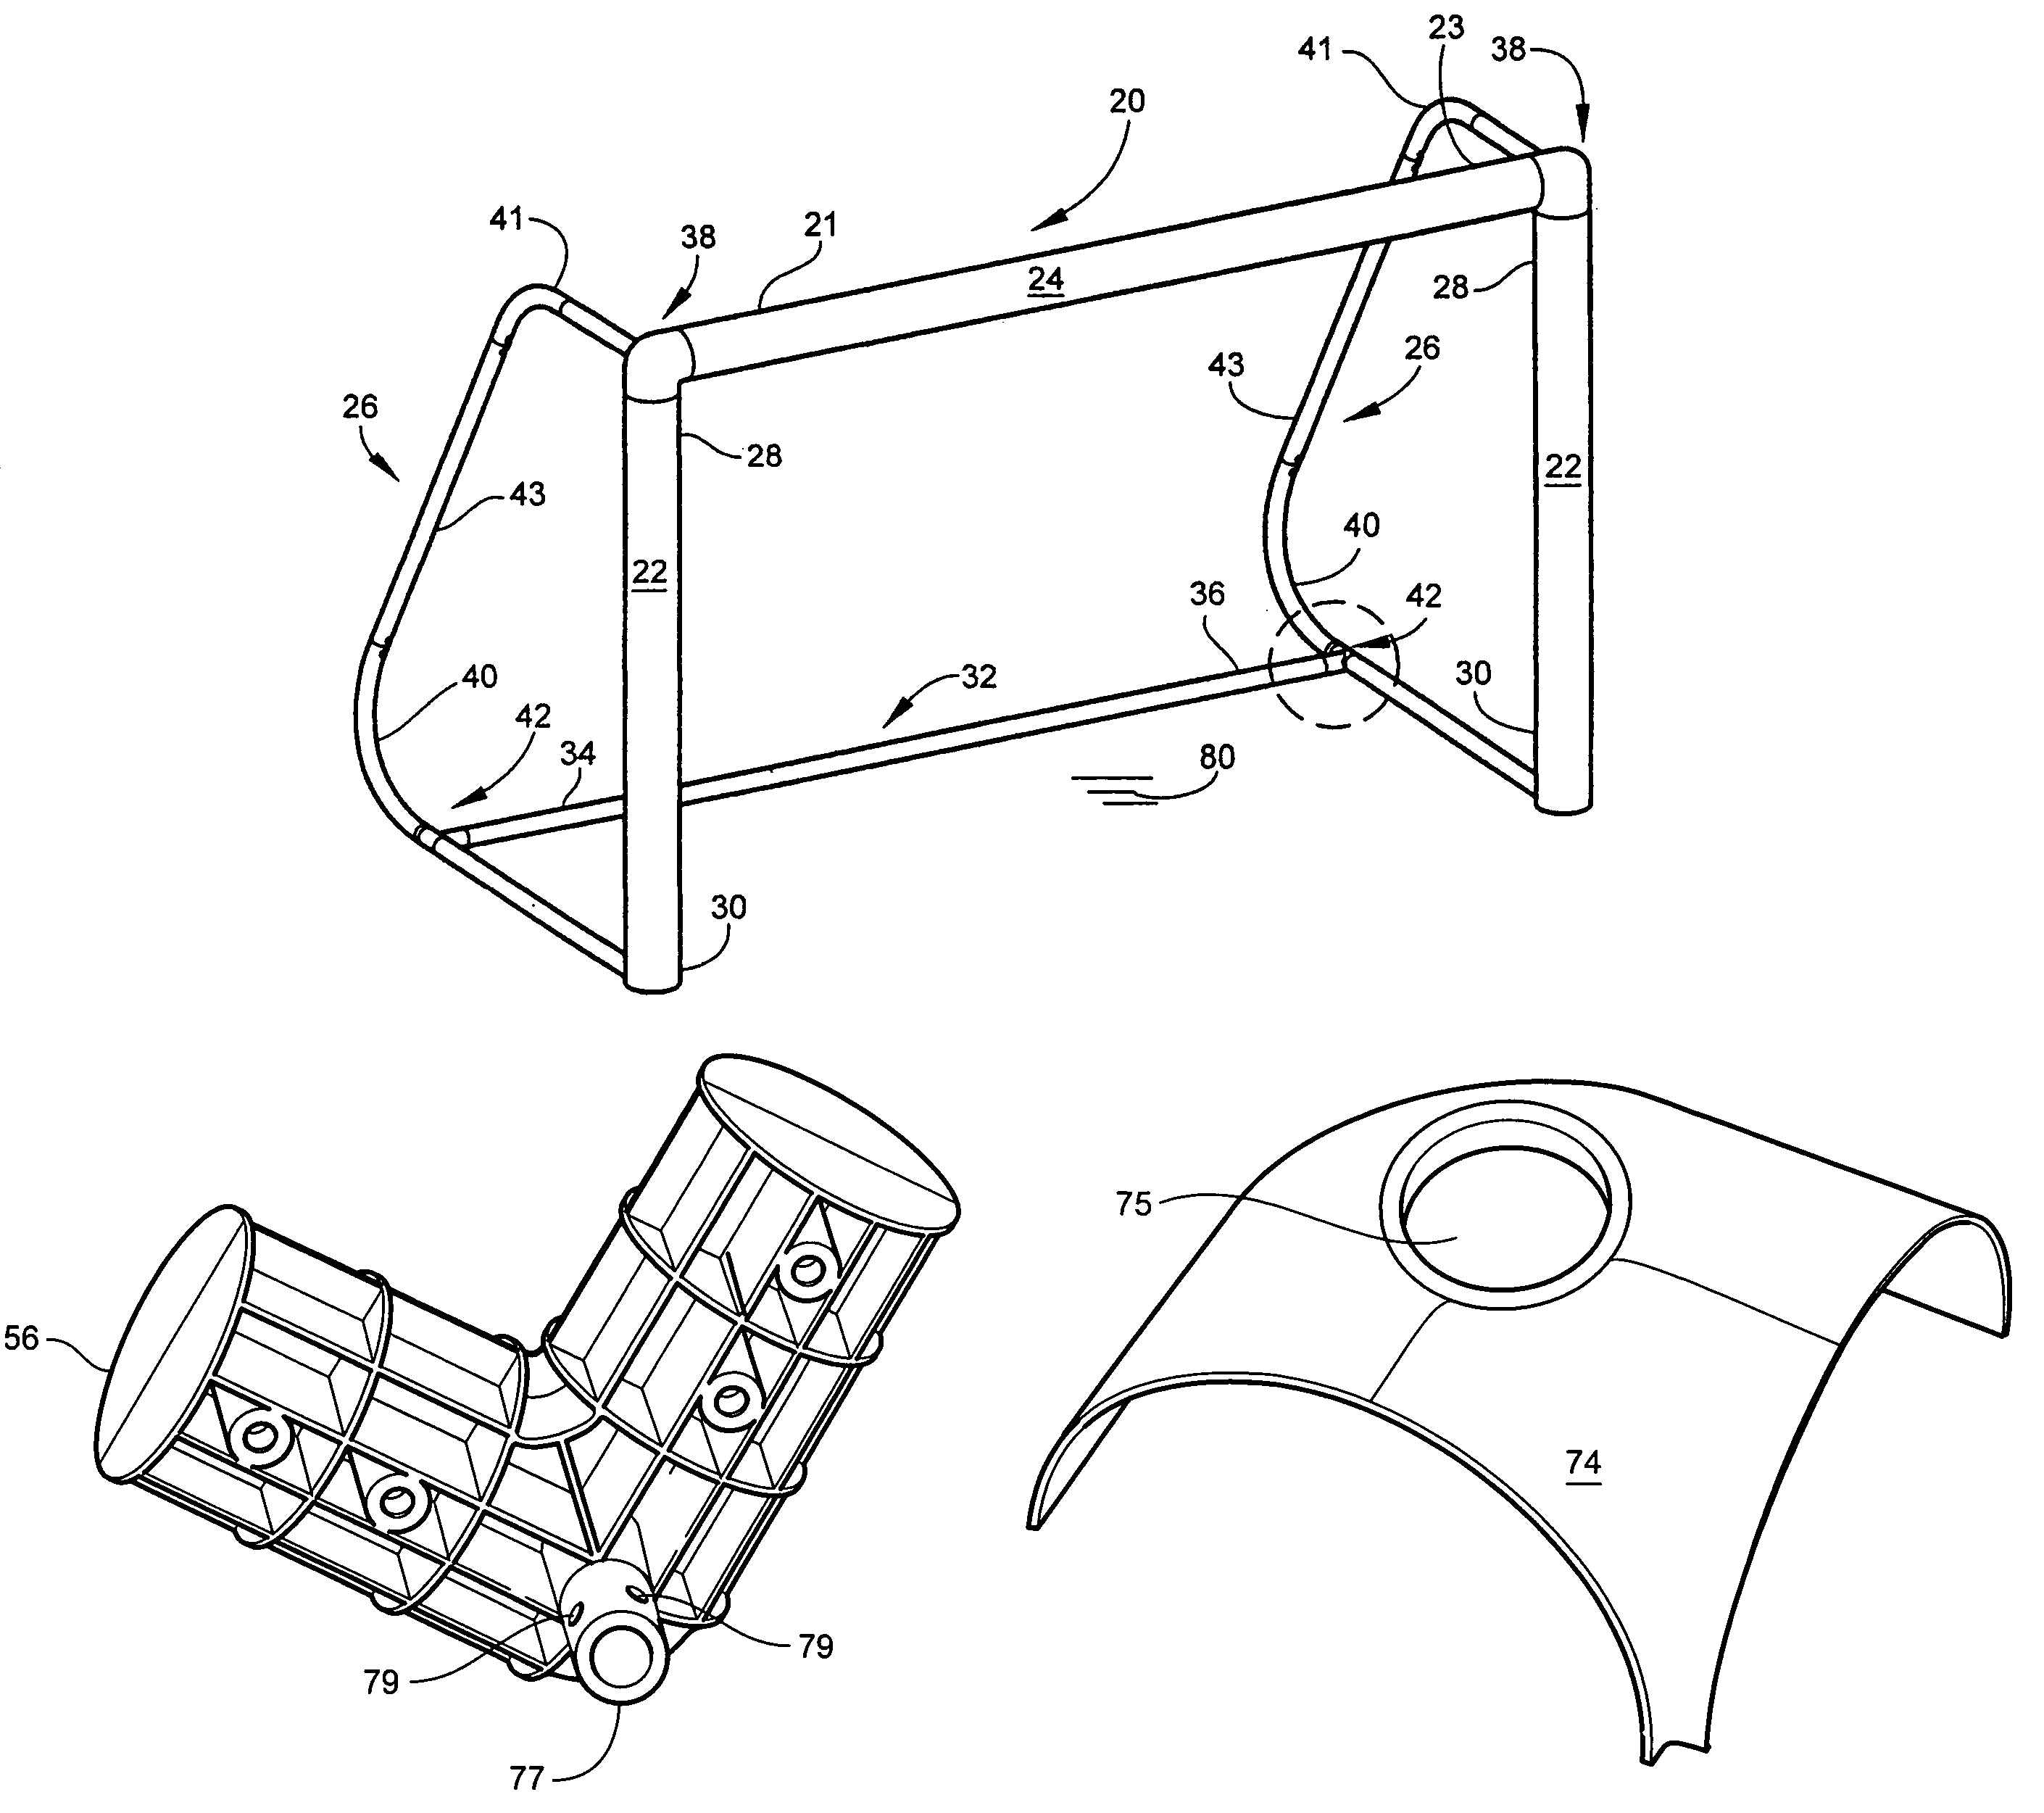 Adjustable and portable soccer goal and molded joint connectors associated therewith